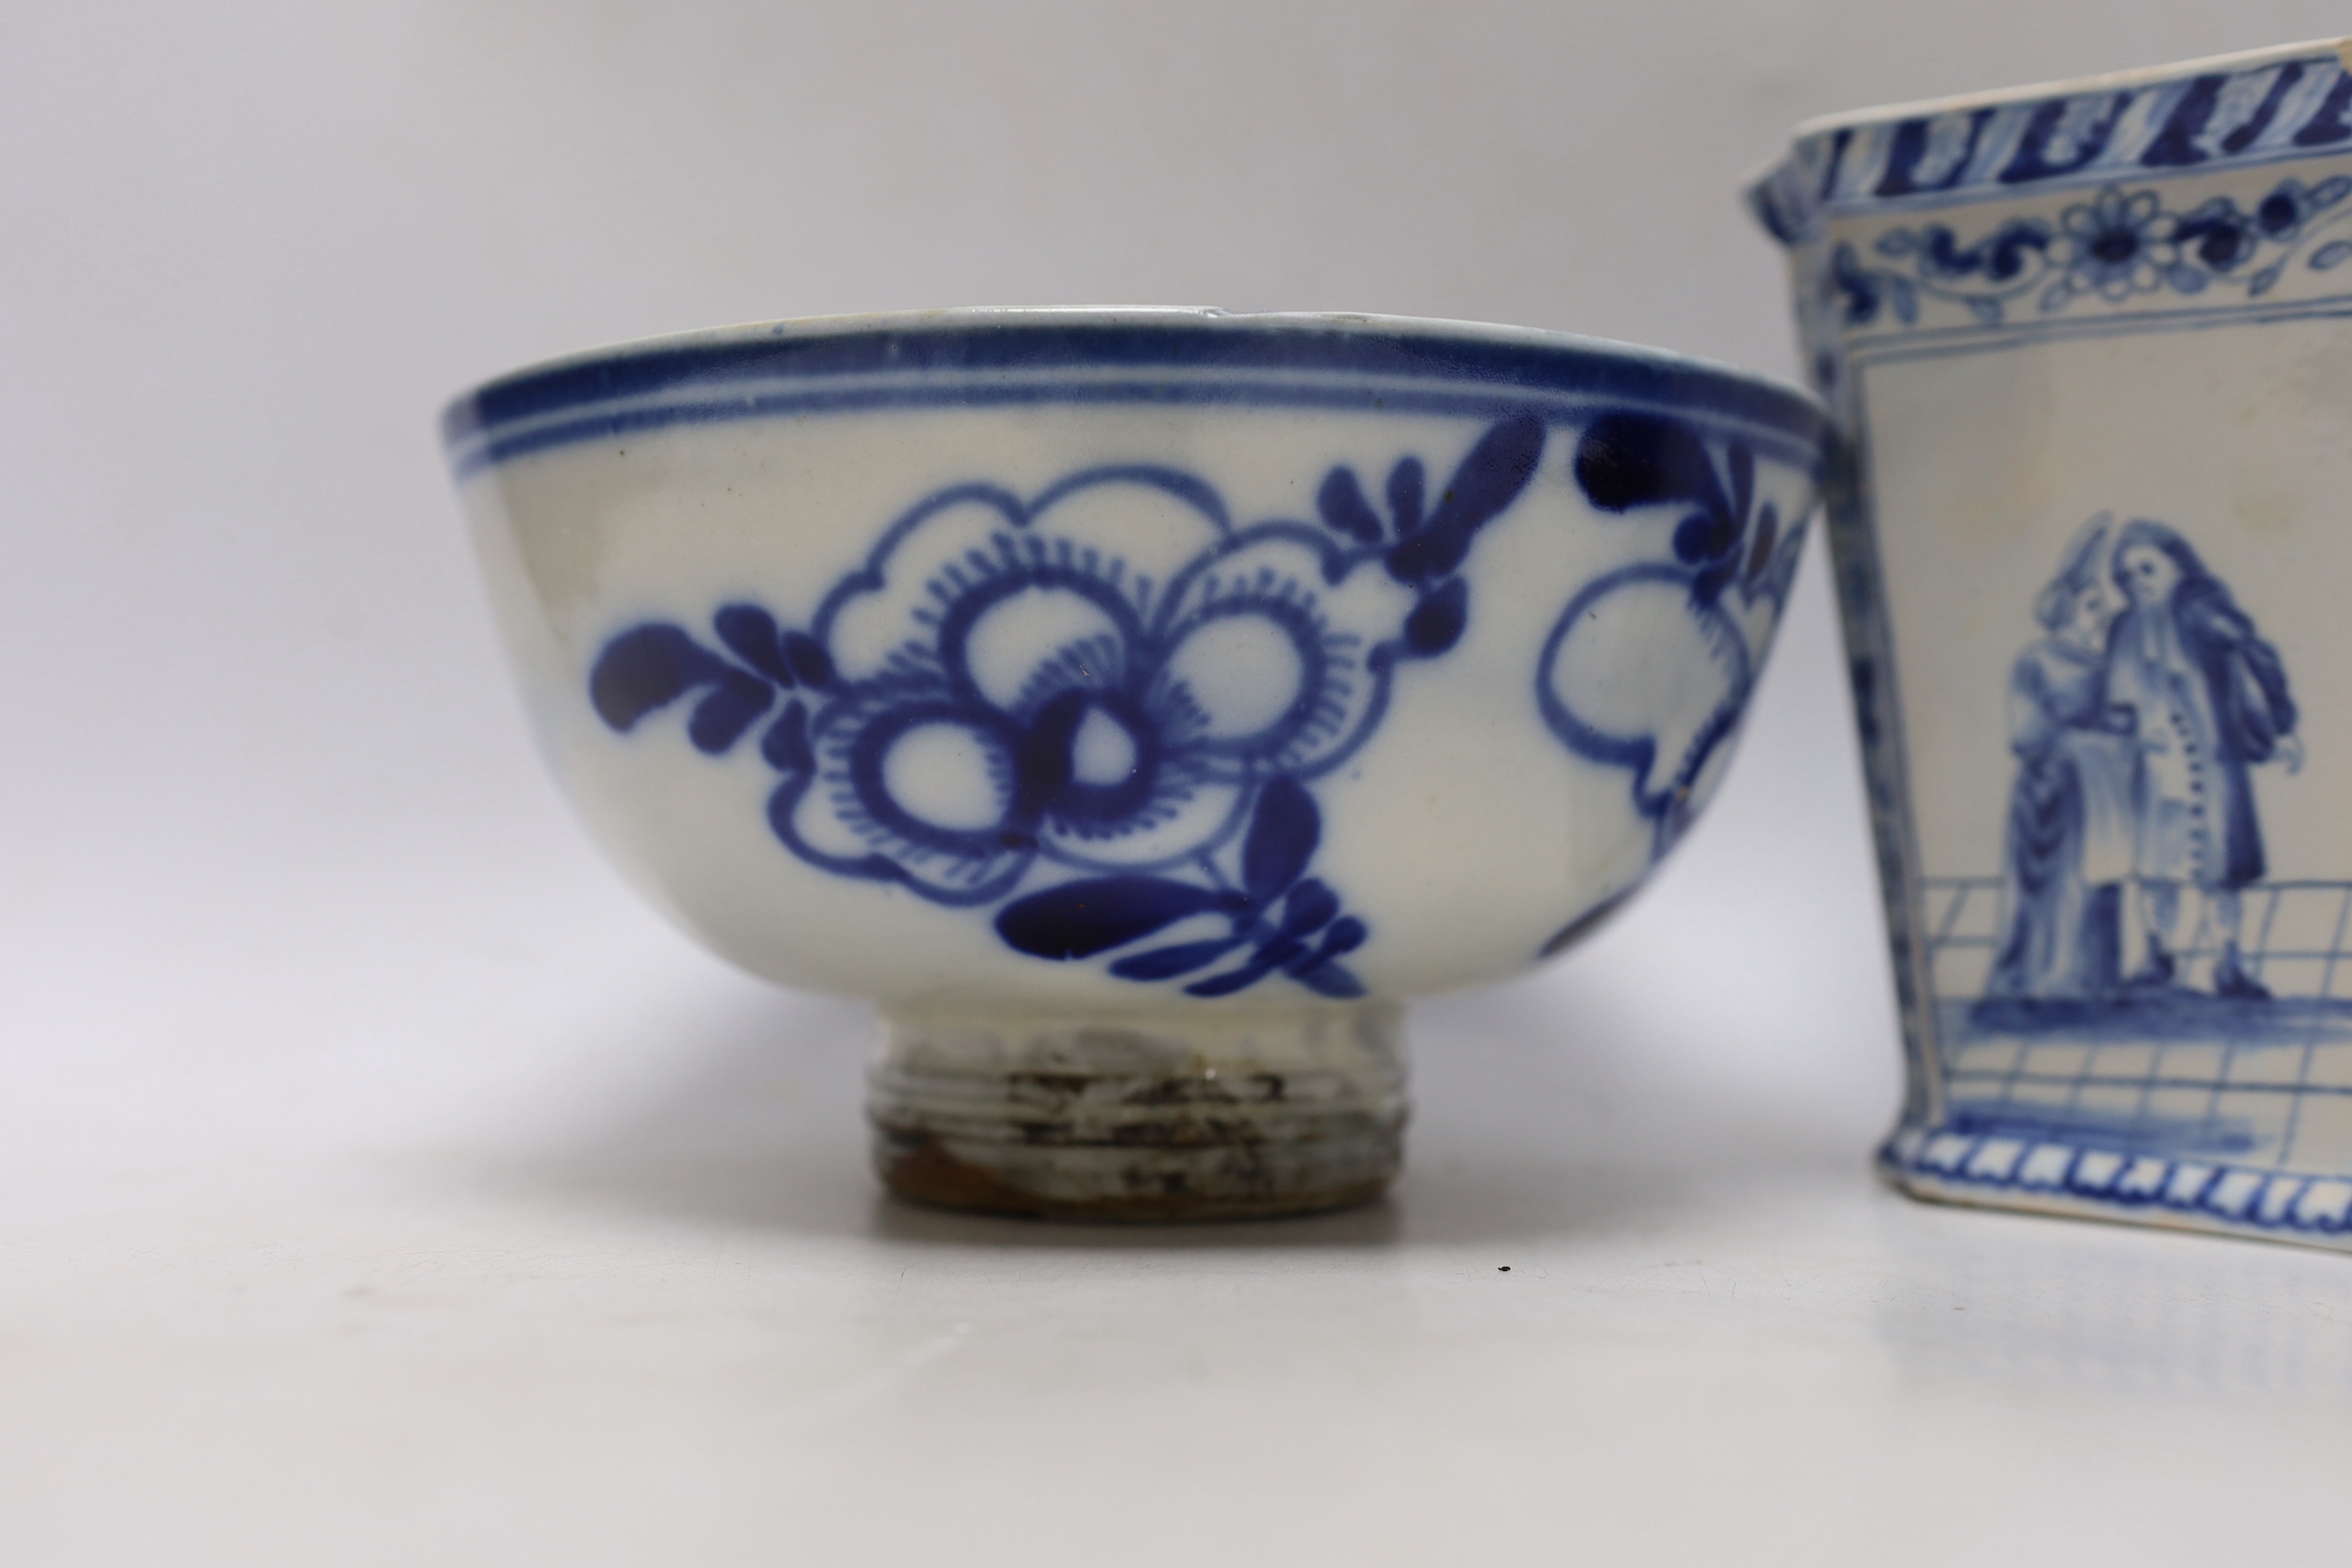 A group of Chinese blue and white bowls a dish and a Delft blue and white vase, largest 19cm in diameter